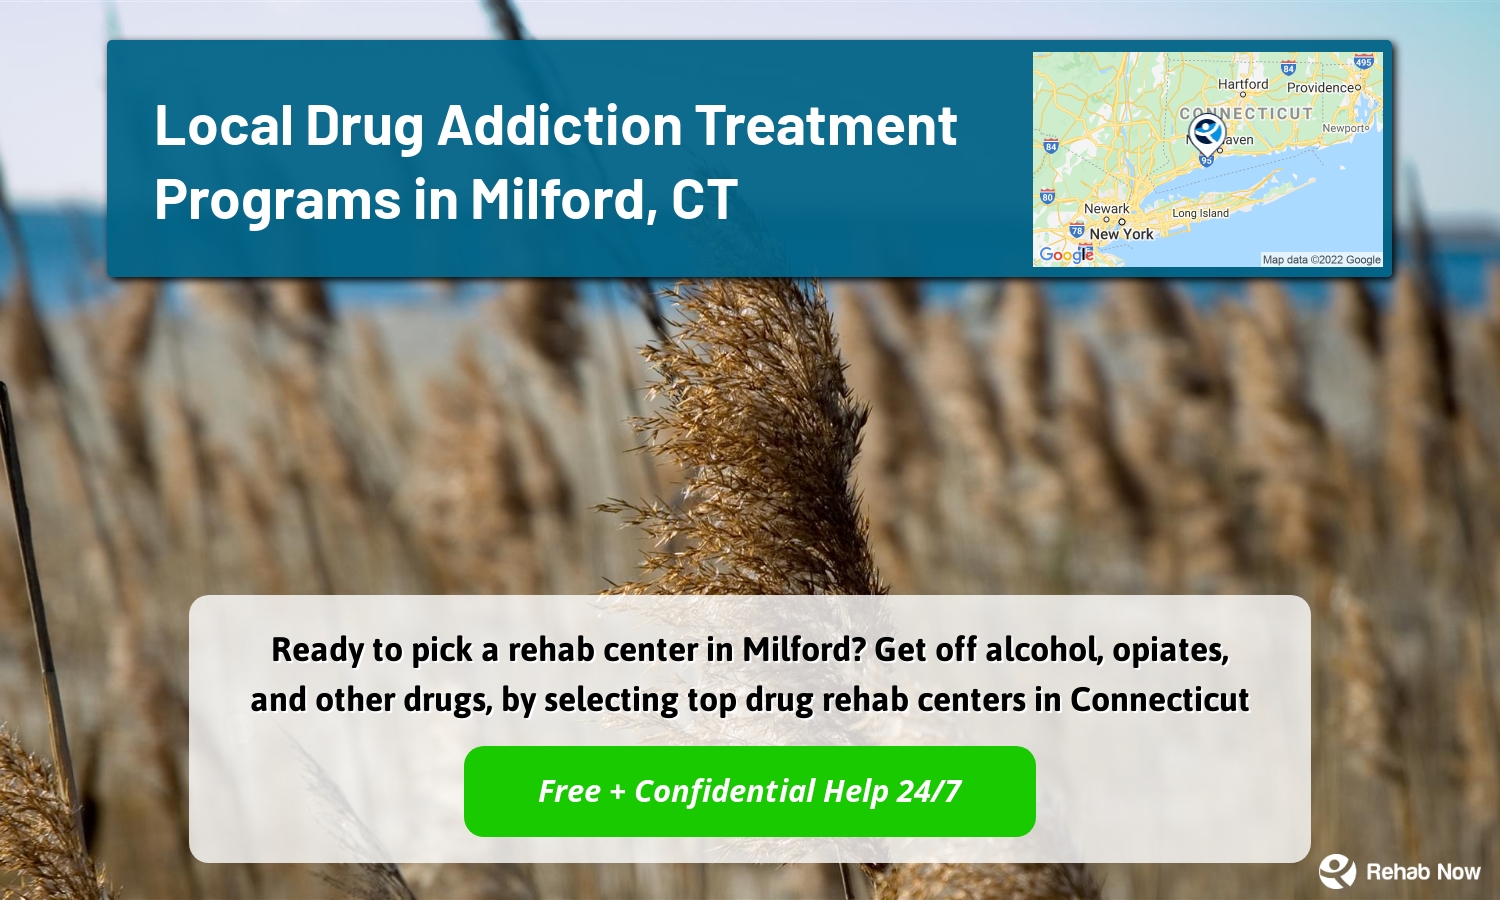 Ready to pick a rehab center in Milford? Get off alcohol, opiates, and other drugs, by selecting top drug rehab centers in Connecticut